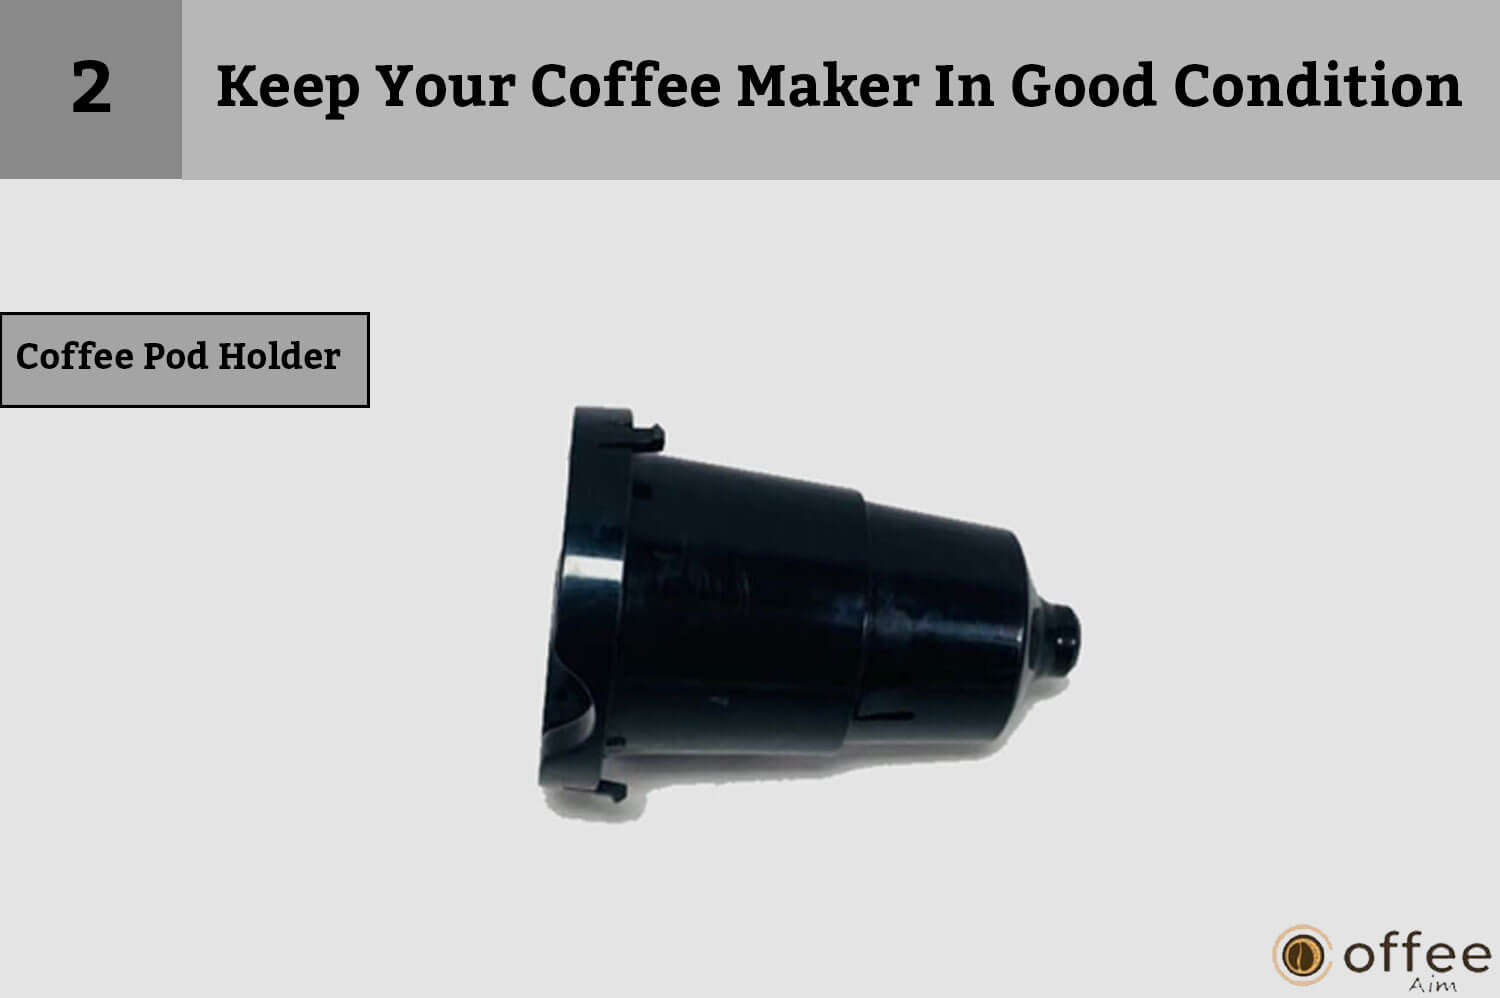 This image depicts the "Coffee Pod Holder" as part of the "Keep Your Coffee Maker In Good Condition: How to Connect Nespresso Vertuo Creatista machine" guide.